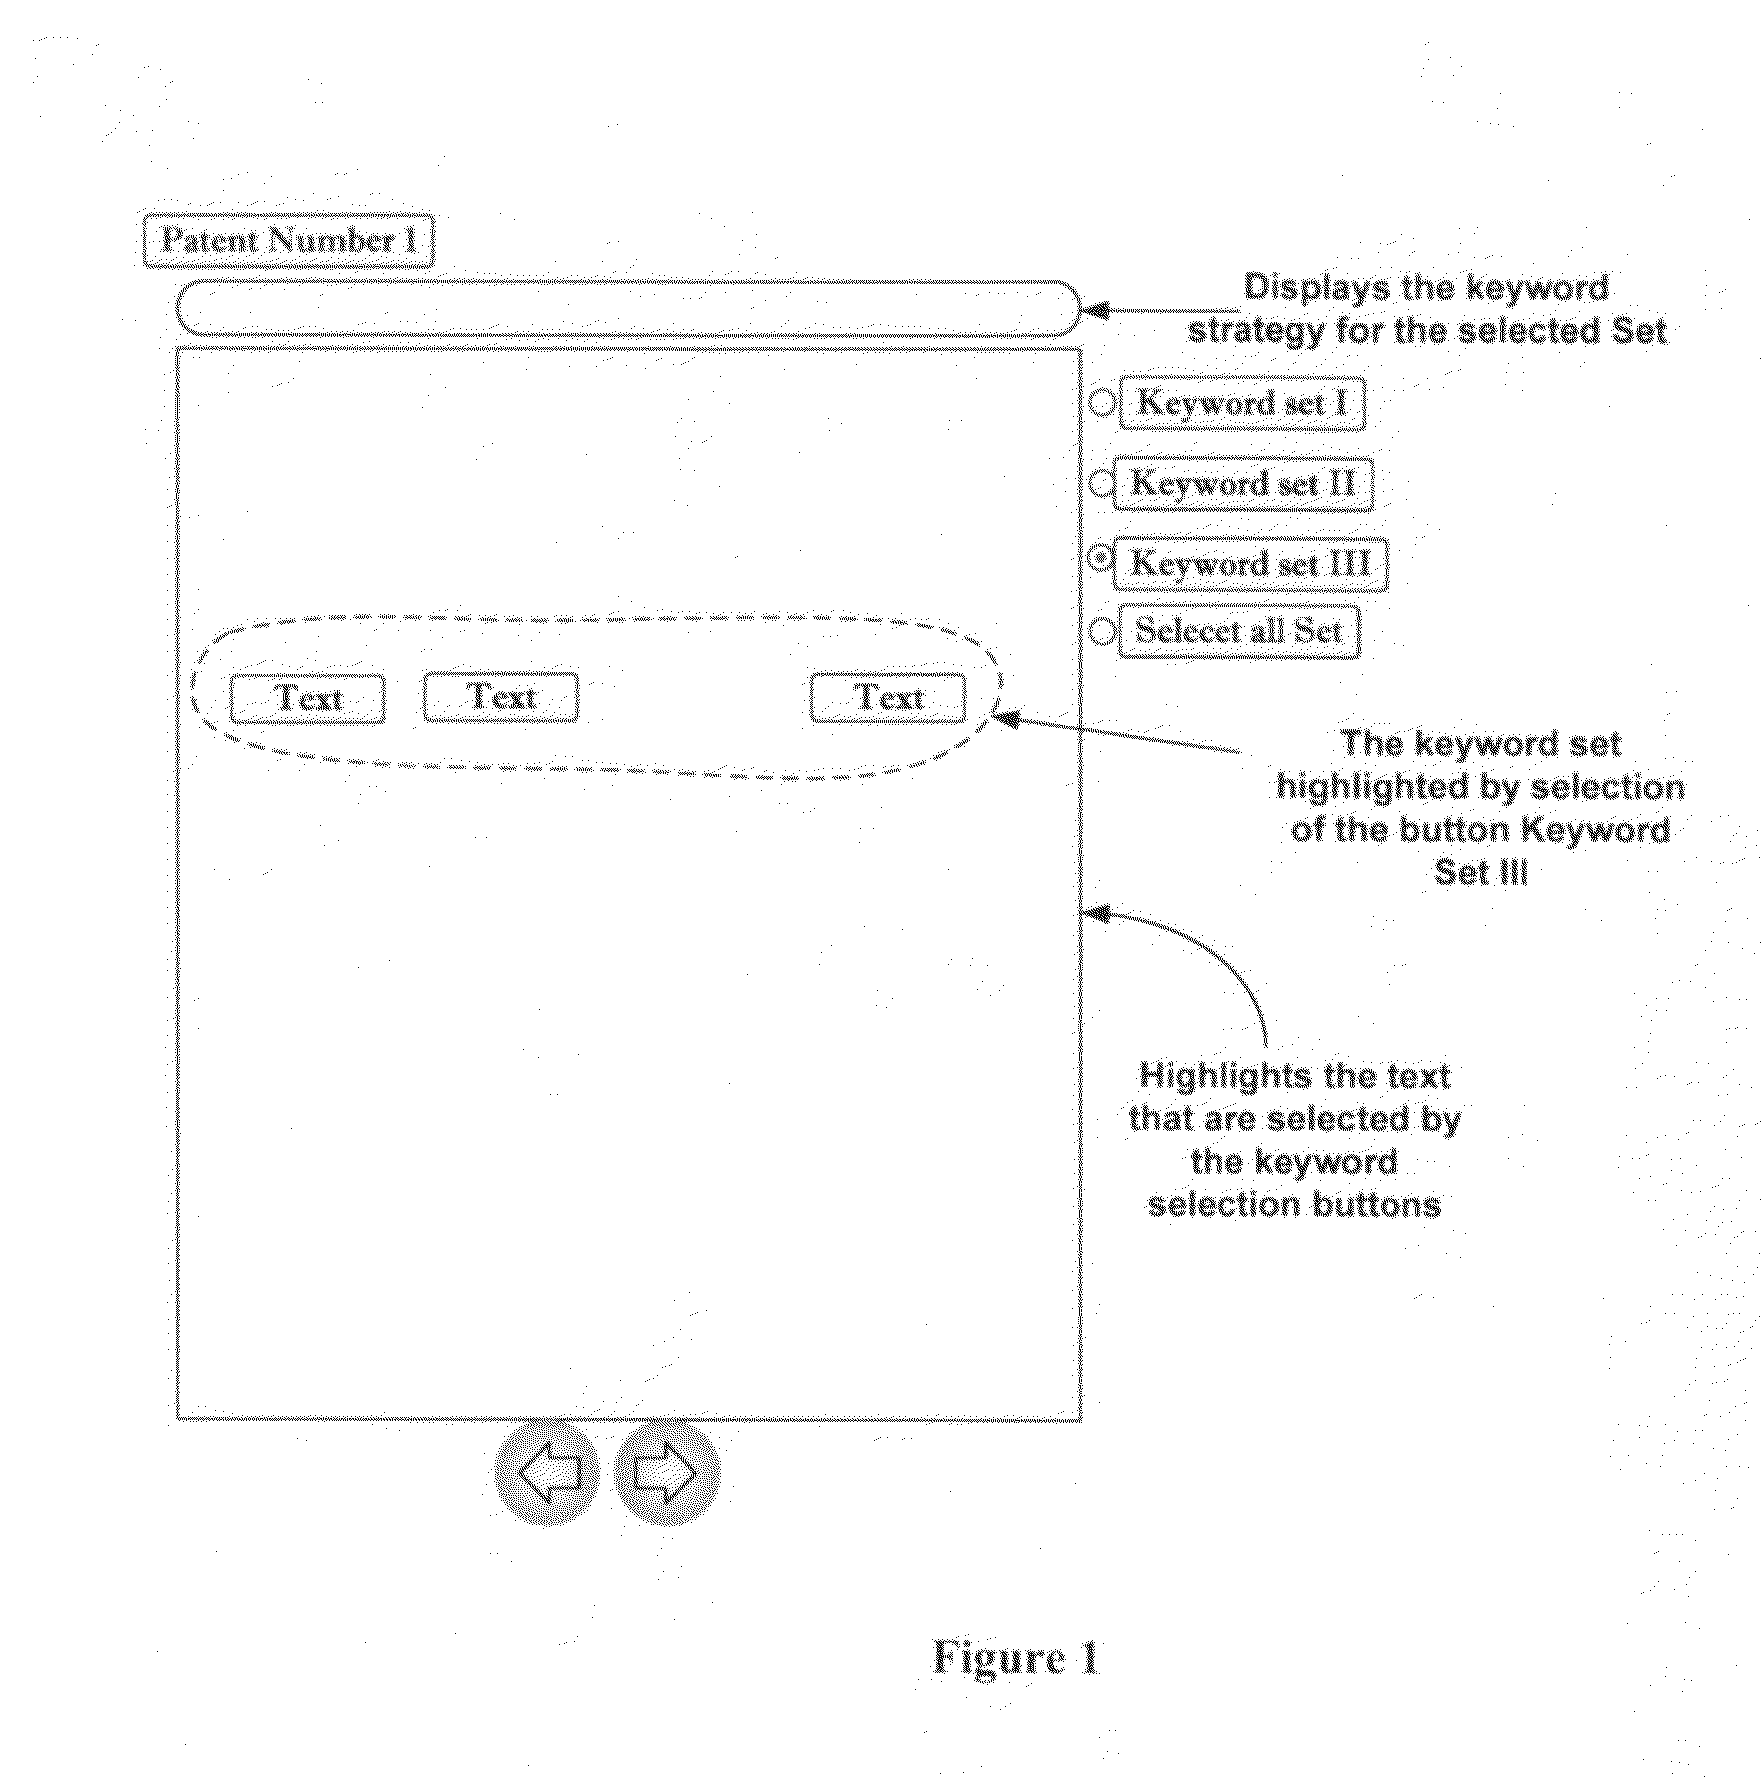 Method for advanced patent search and analysis